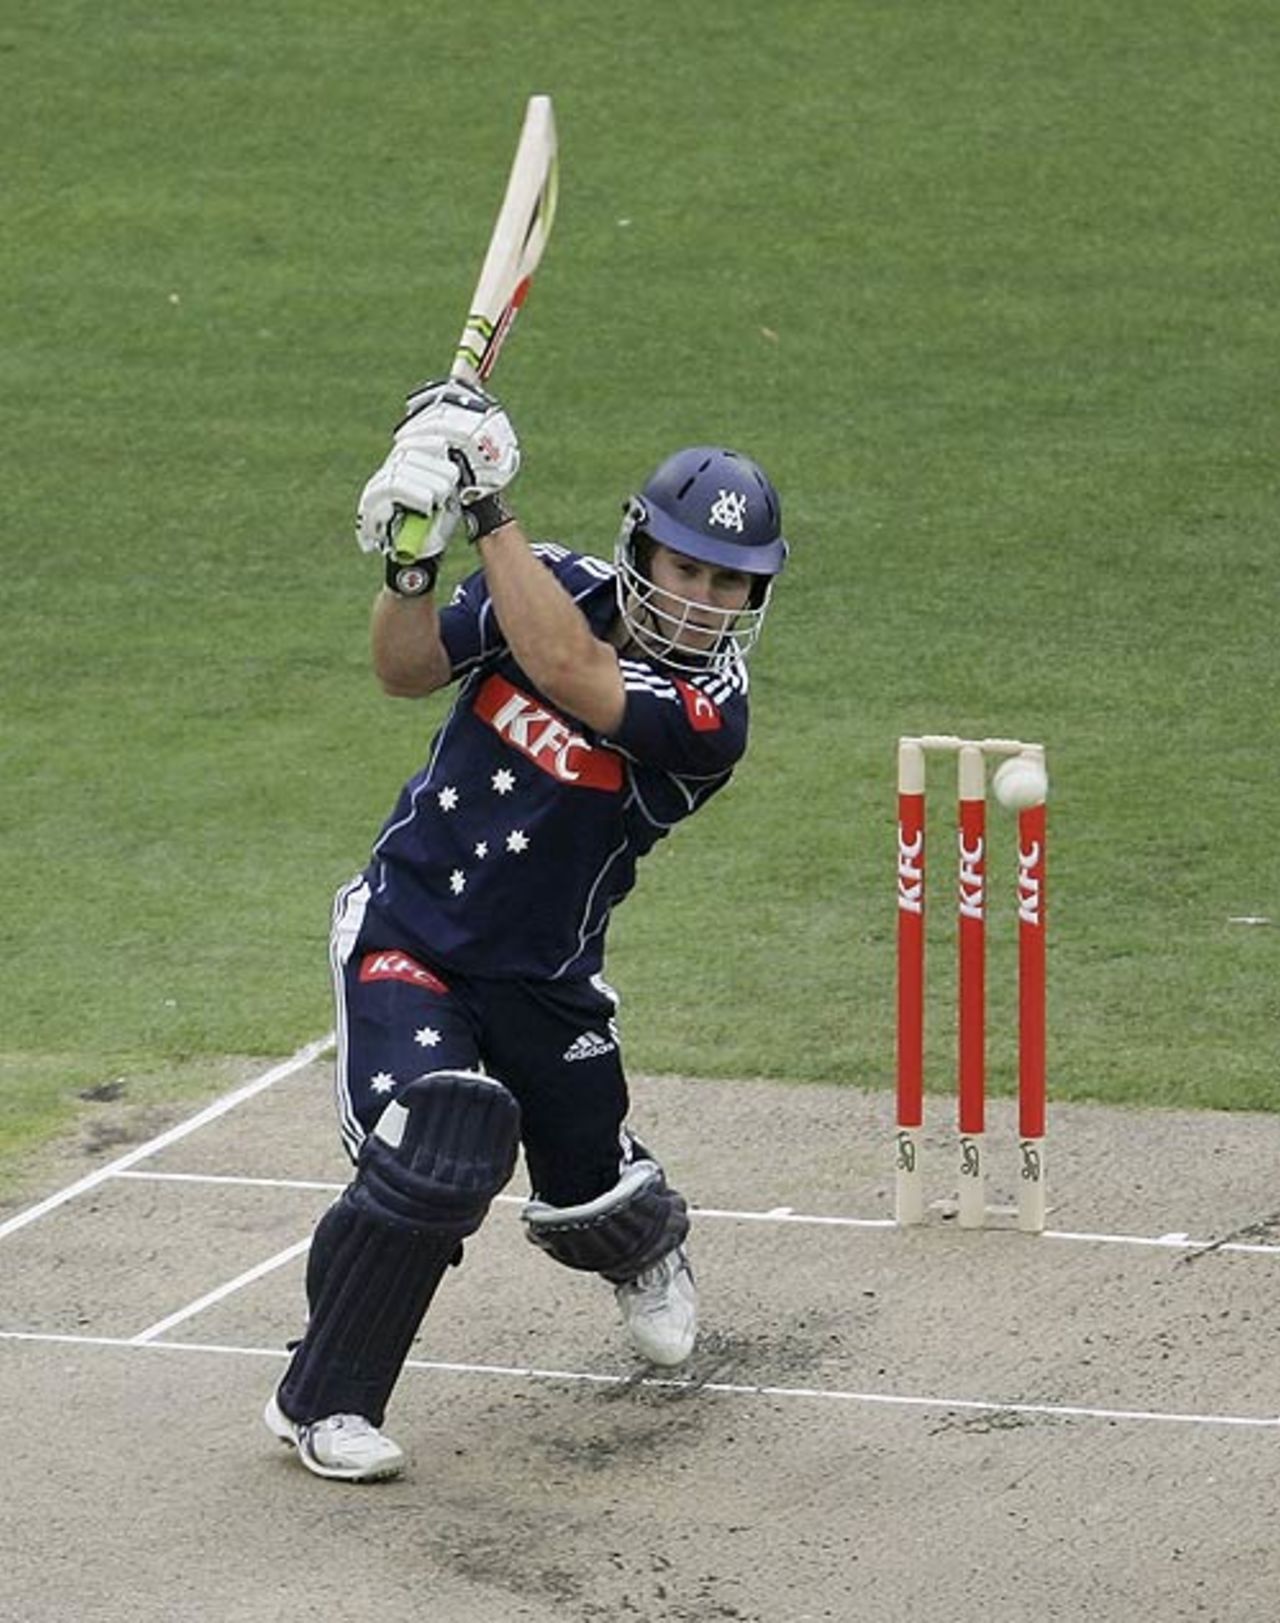 Aiden Blizzard hits in the air, Victoria v Queensland, KFC Twenty20, Melbourne, January 7, 2007